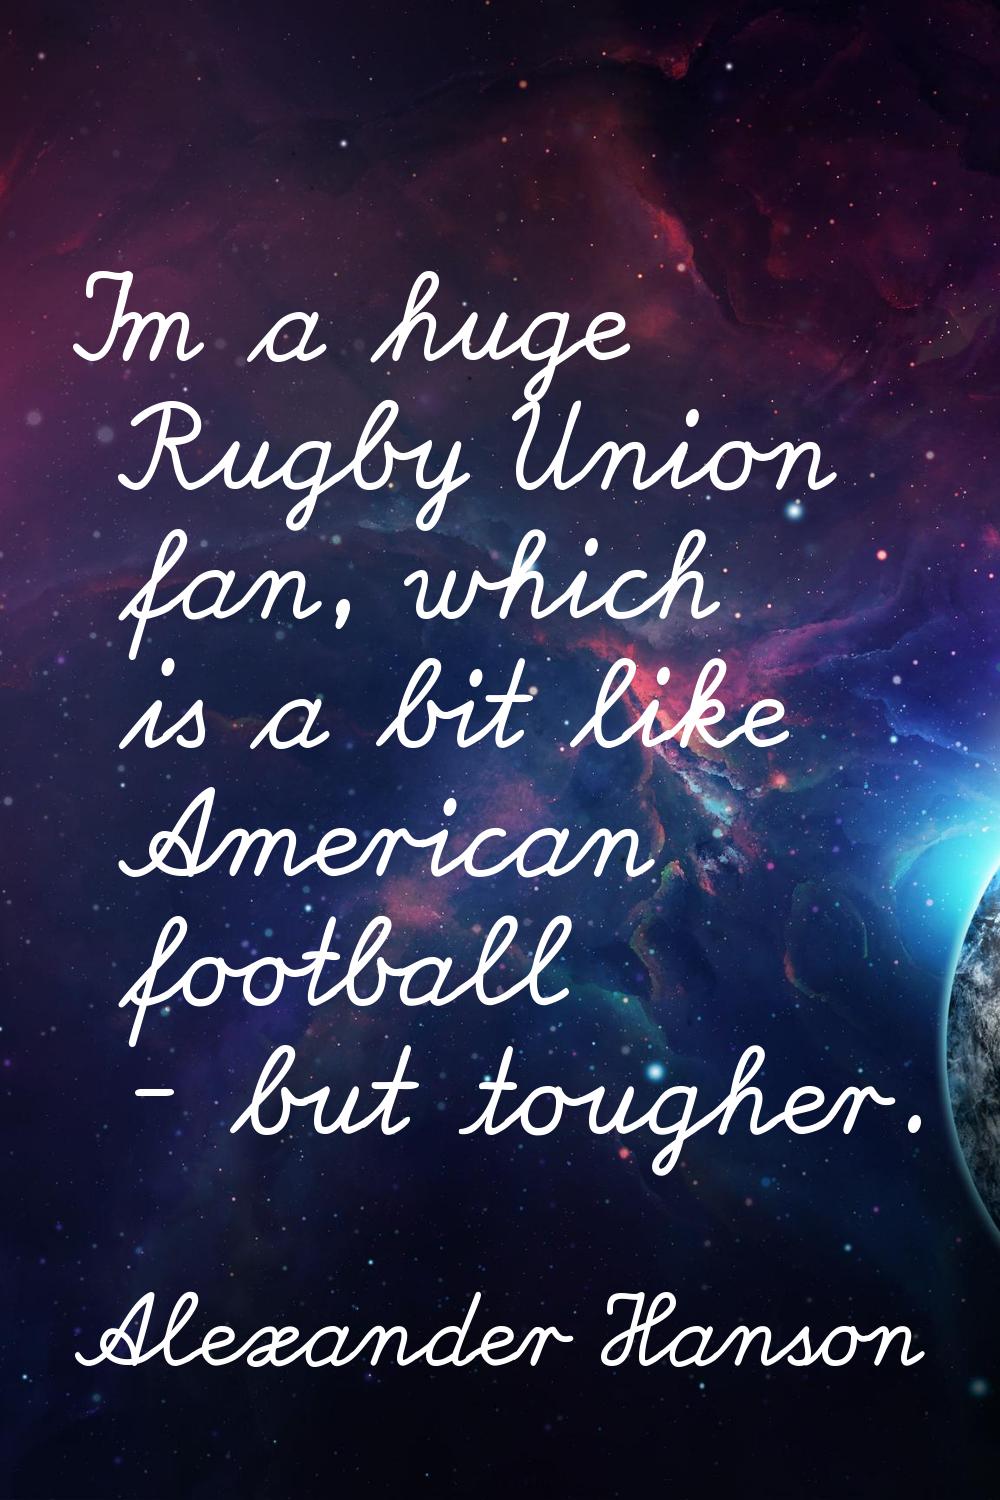 I'm a huge Rugby Union fan, which is a bit like American football - but tougher.